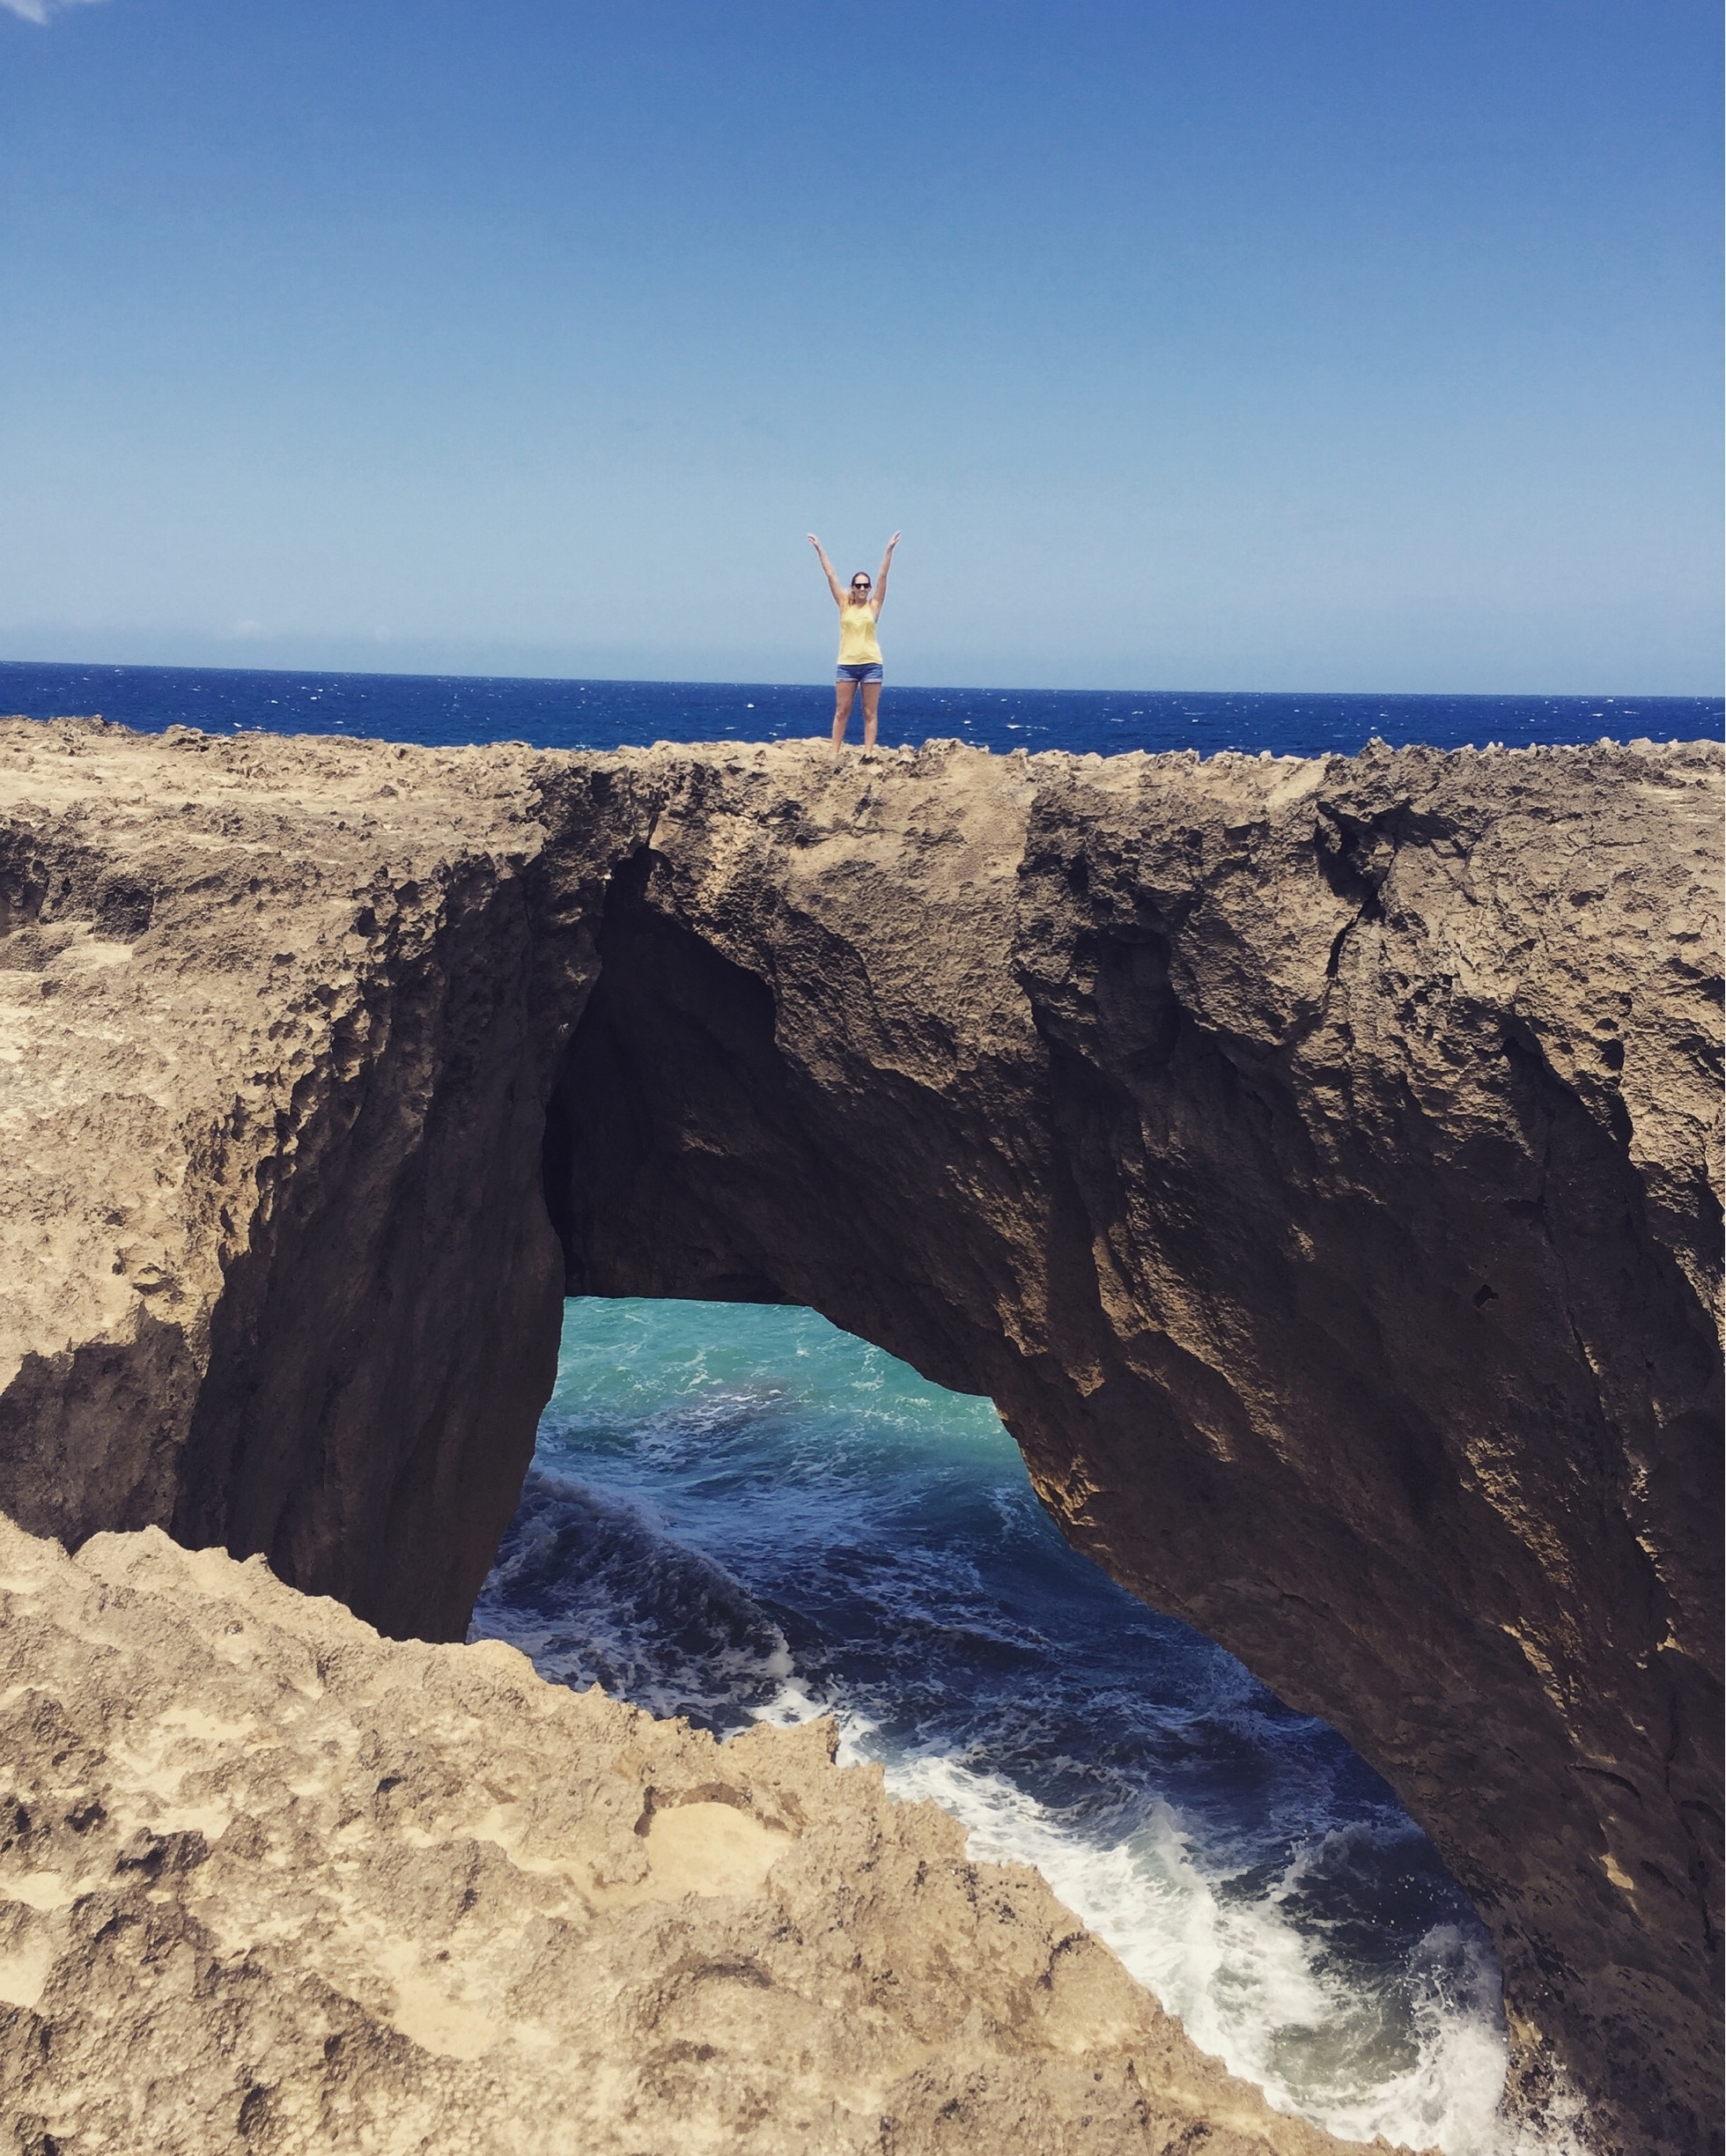 Playa Jobos in Puerto Rico had great $1 empanadas, lots of sun, and a really cool cliff! 